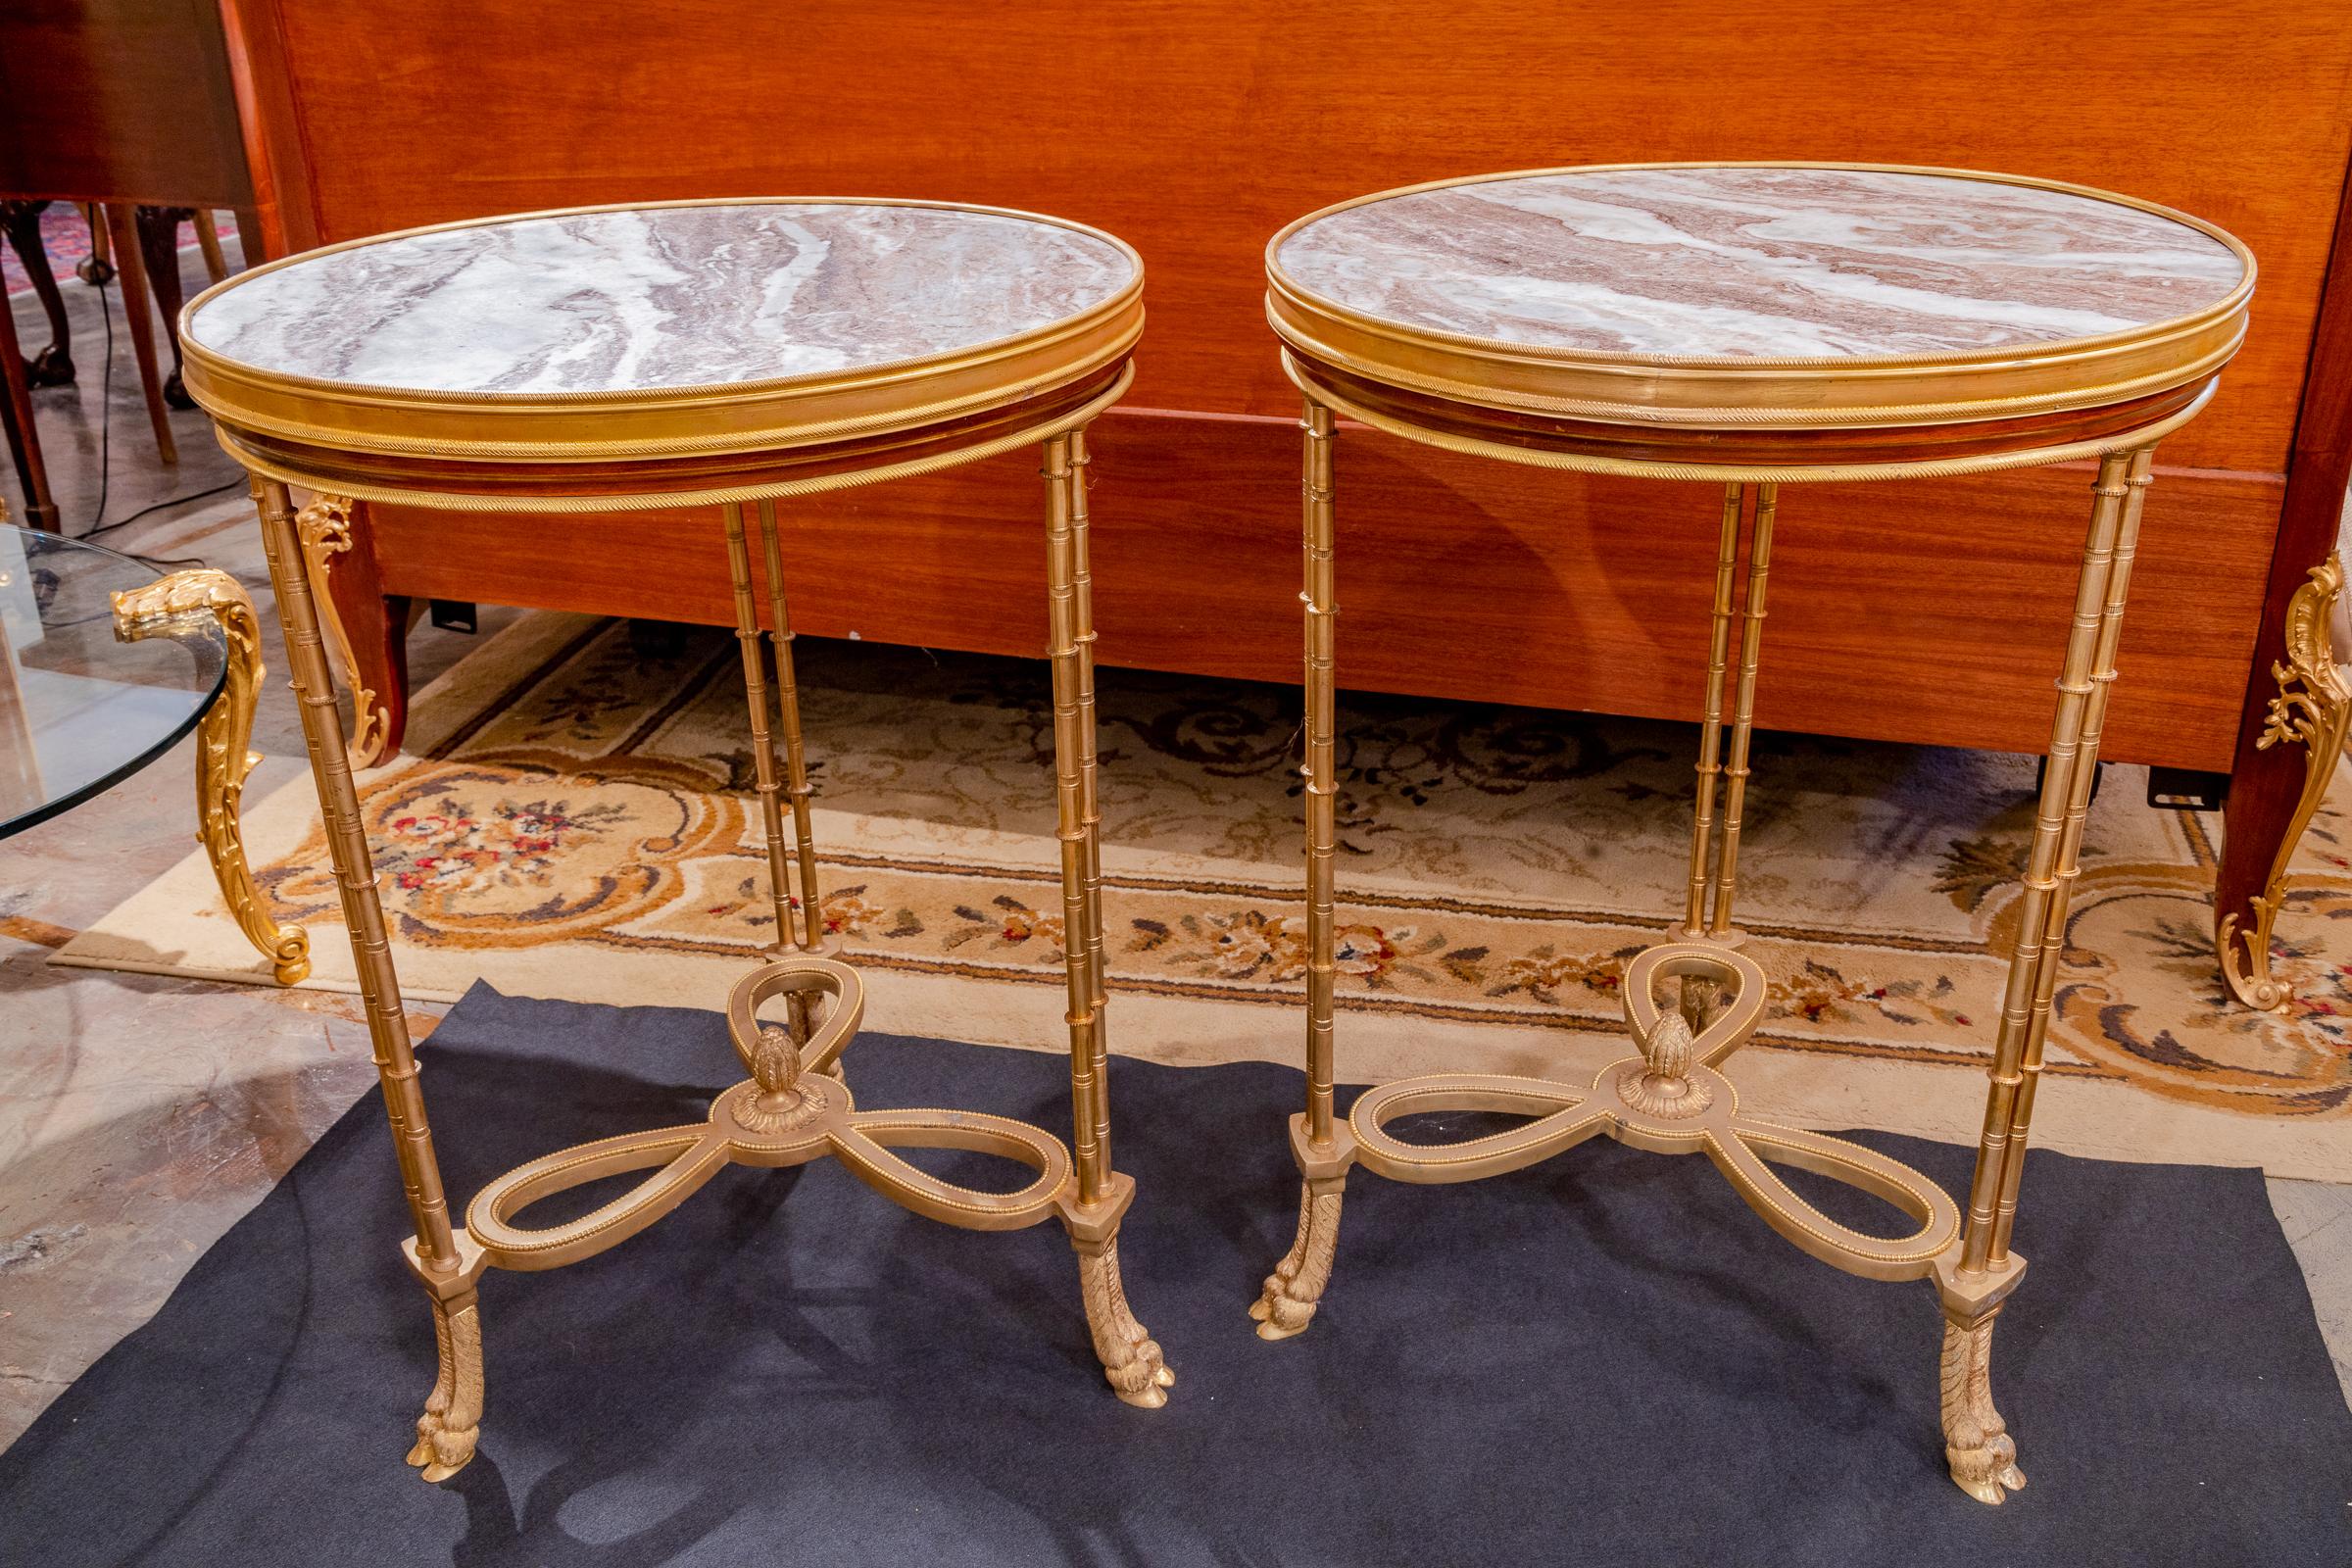 A fine pair of French mahogany and gilt bronze Empire style gueridon tables with marble tops mid 20th century.